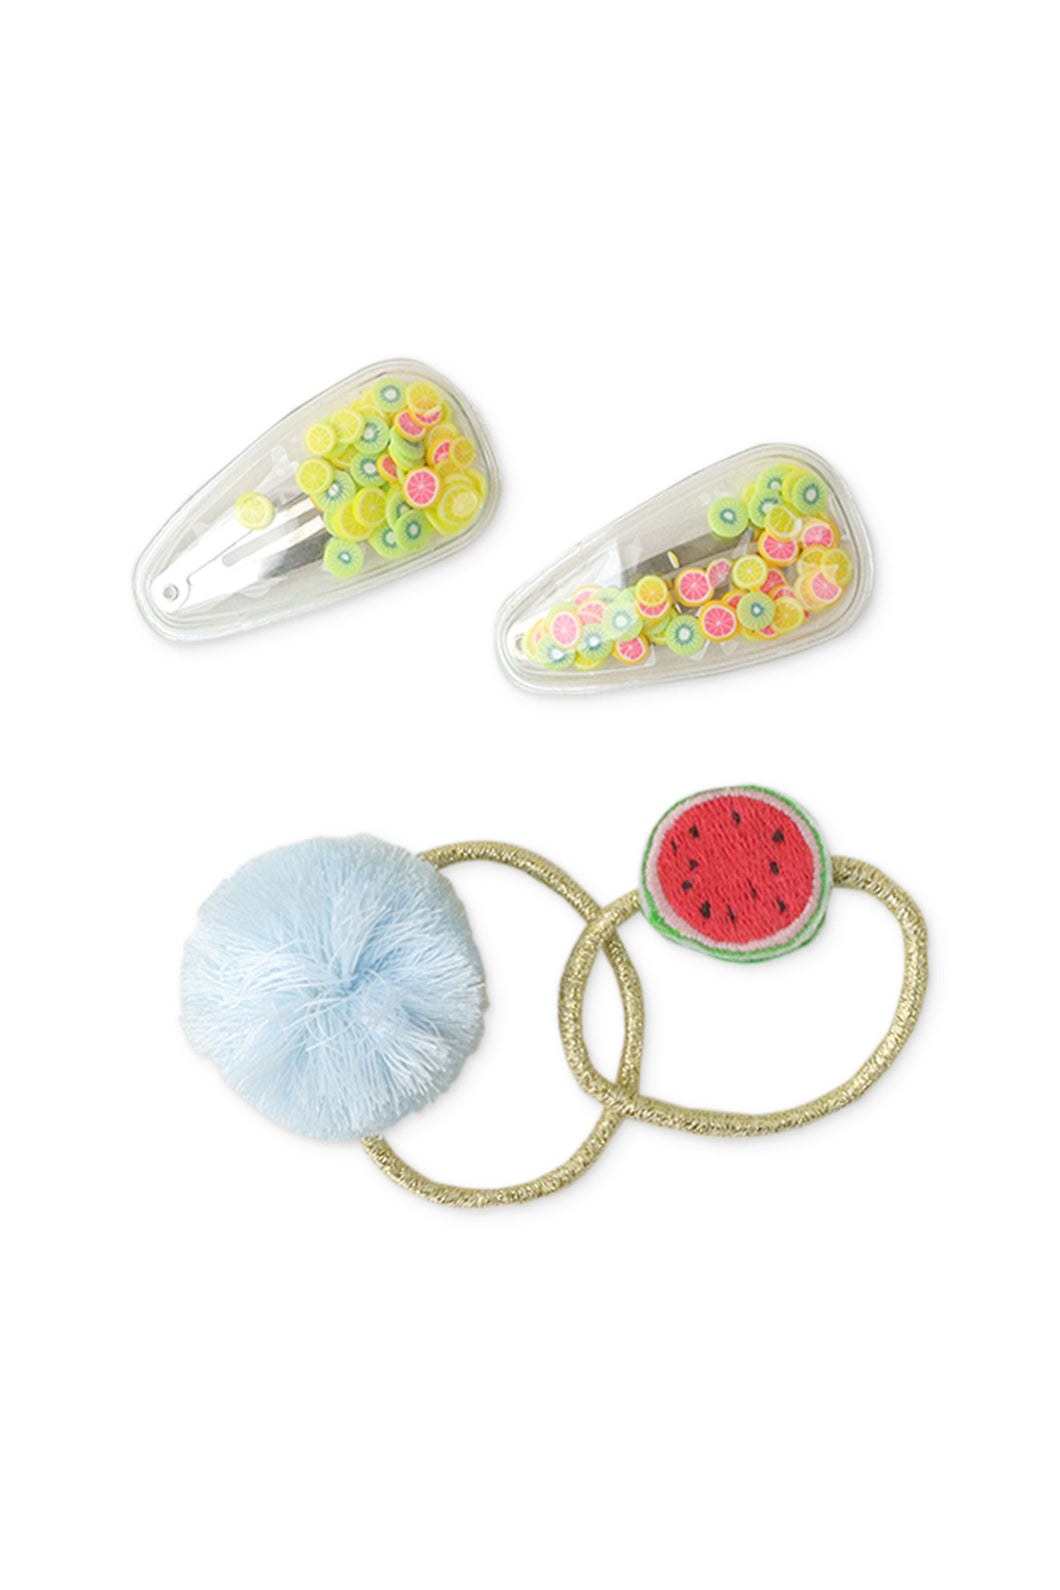 Gingersnaps Shaker Snaps & Embro Patch Hairties